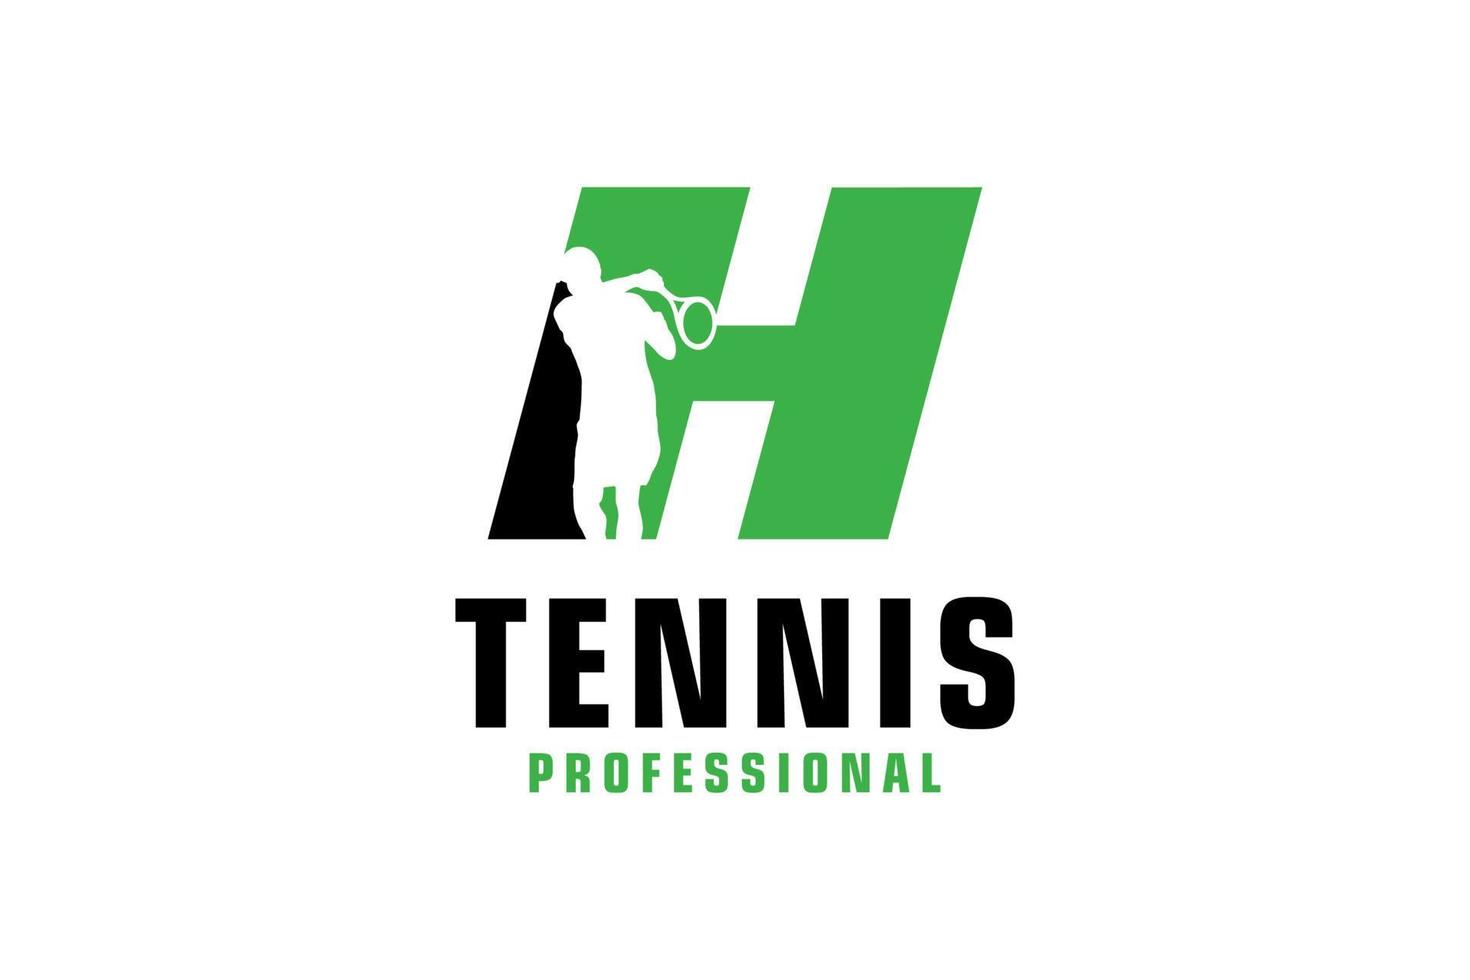 Letter H with Tennis player silhouette Logo Design. Vector Design Template Elements for Sport Team or Corporate Identity.